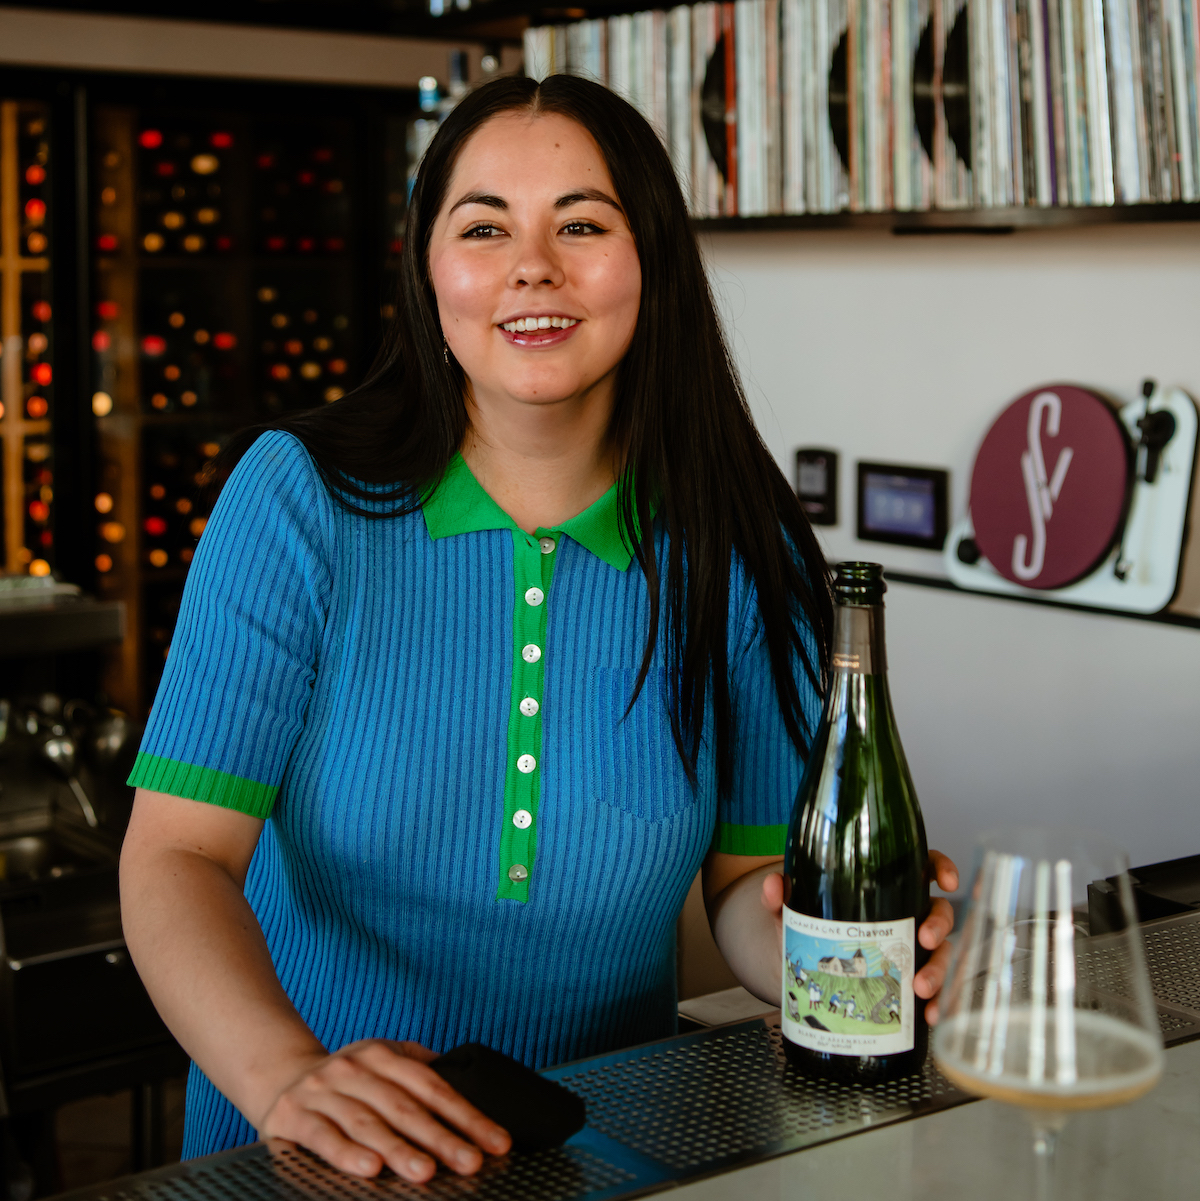 Dark-haired woman wearing teal looks into the distance while smiling with wine bottle in hand and a shelf of records in the background